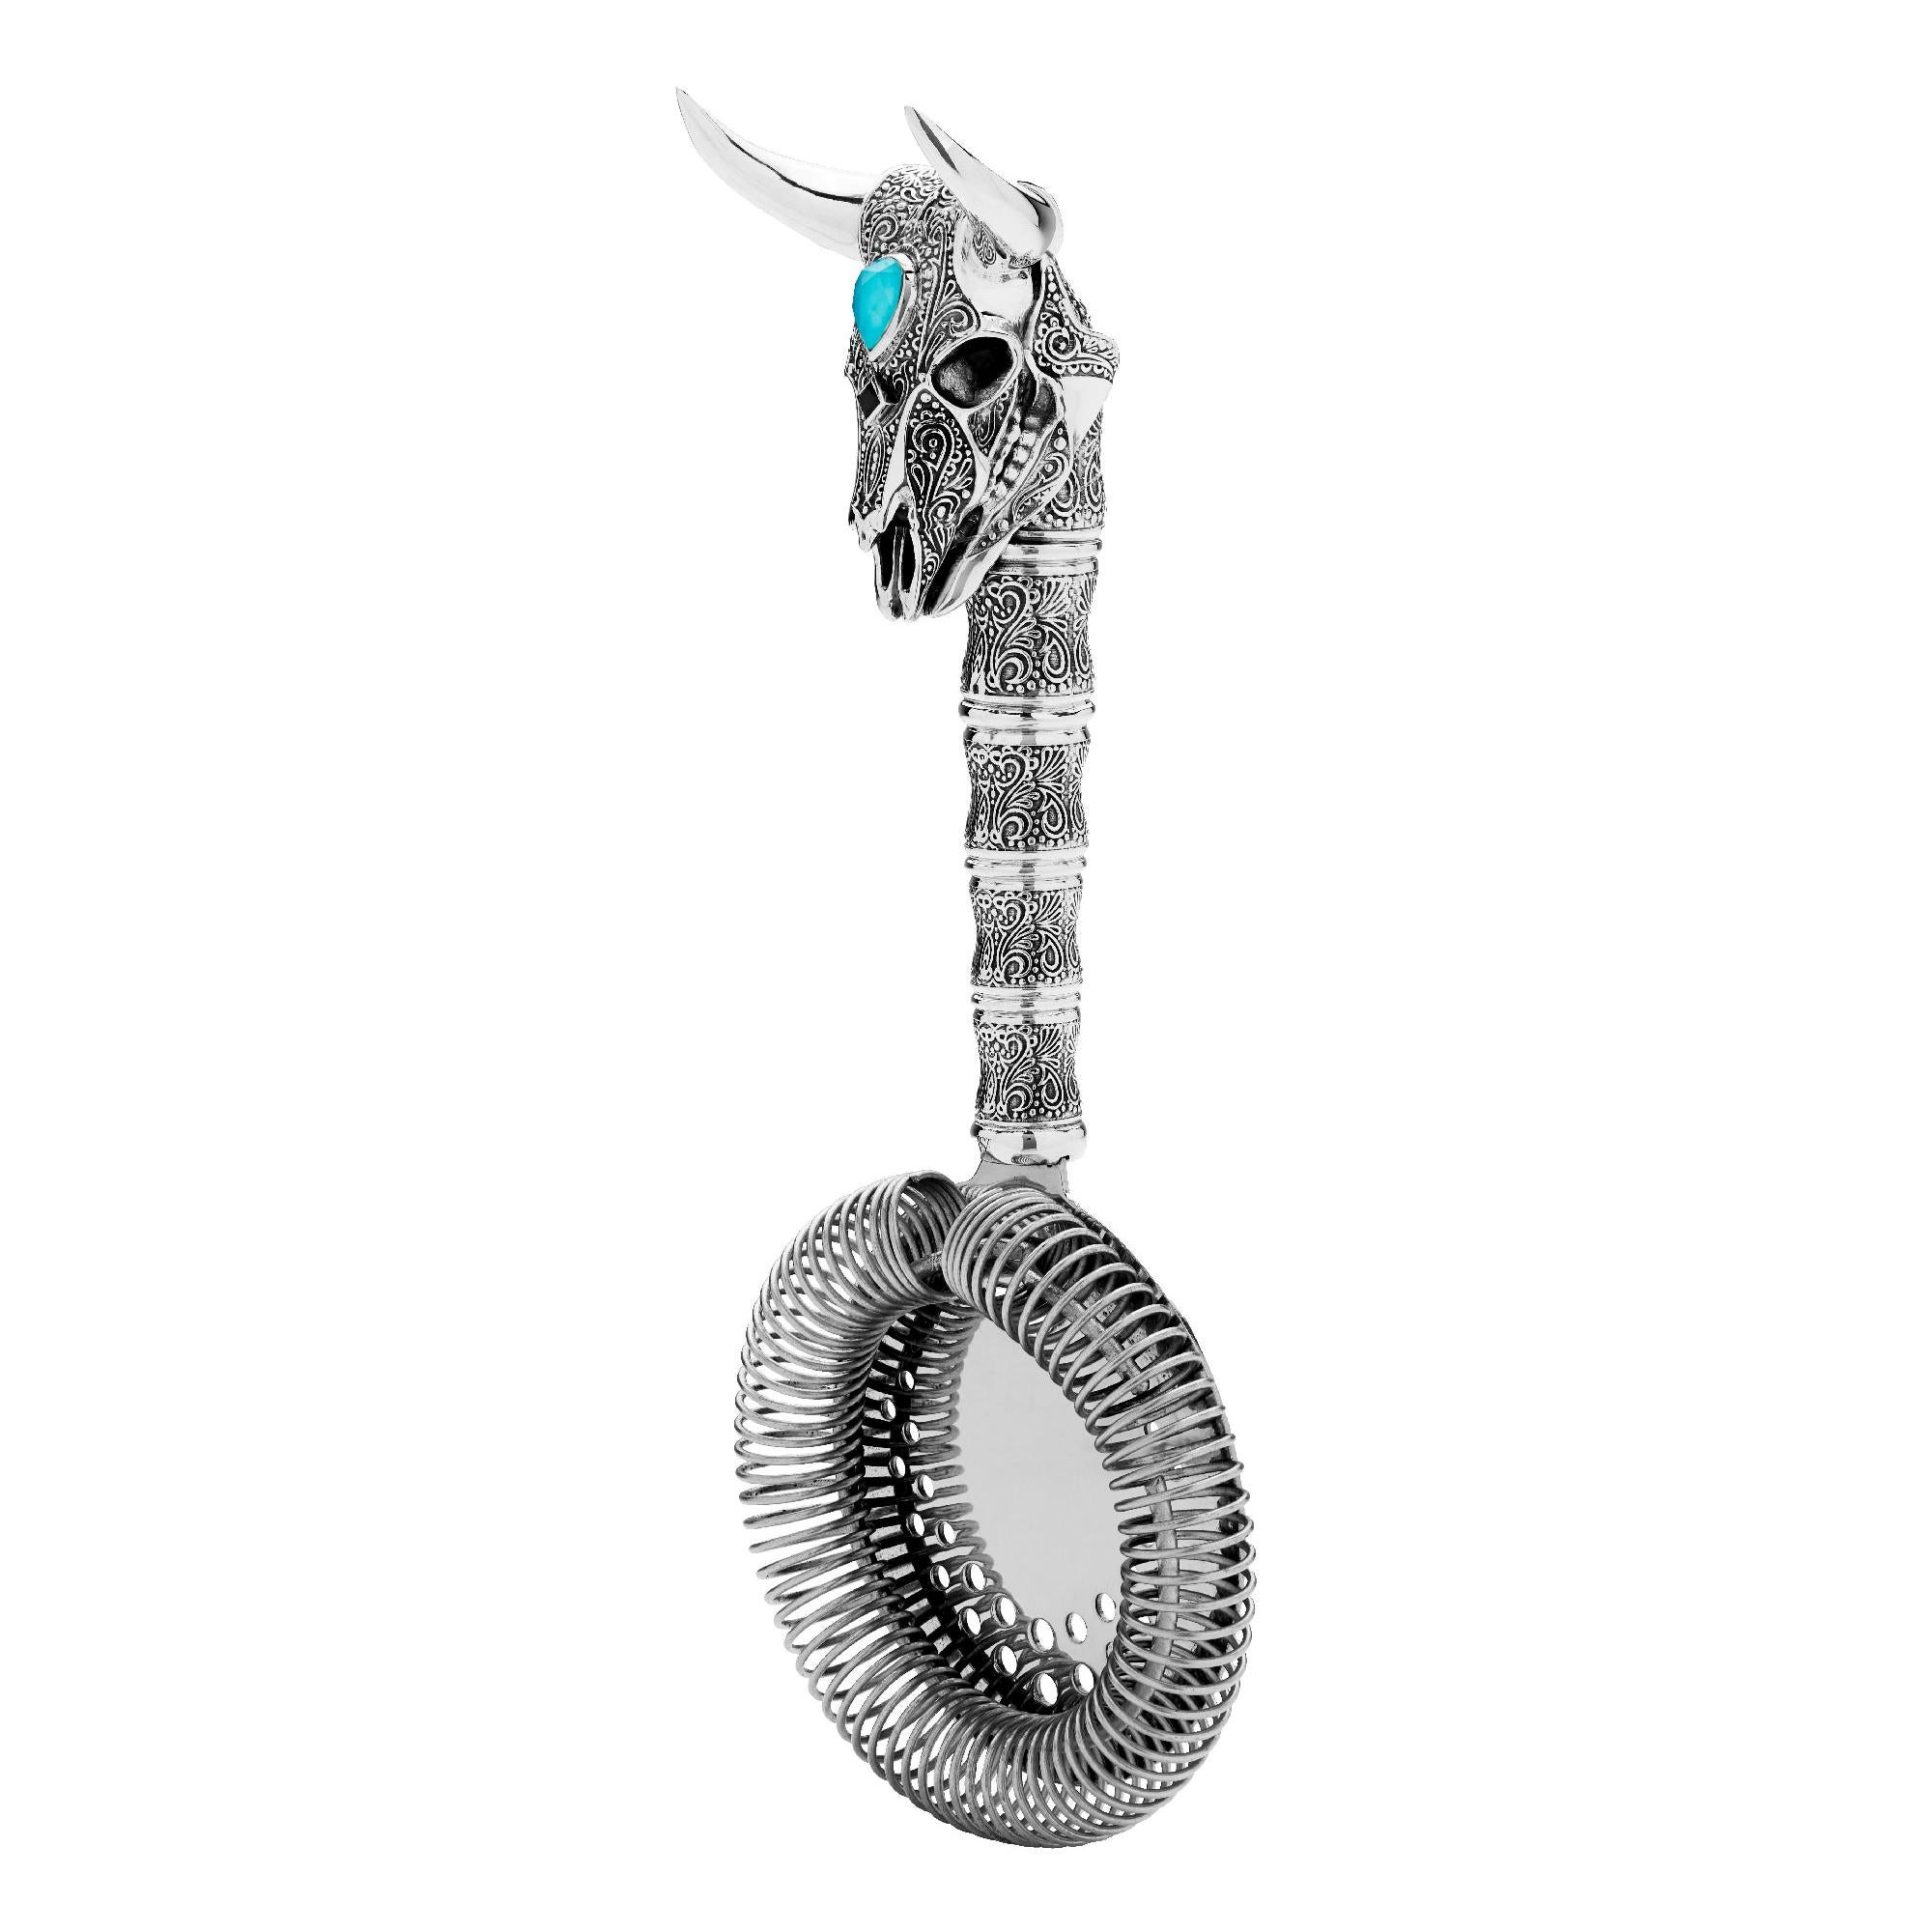 Stephen Webster Tequila Lore Cow Cocktail Strainer with Turquoise Crystal Haze For Sale